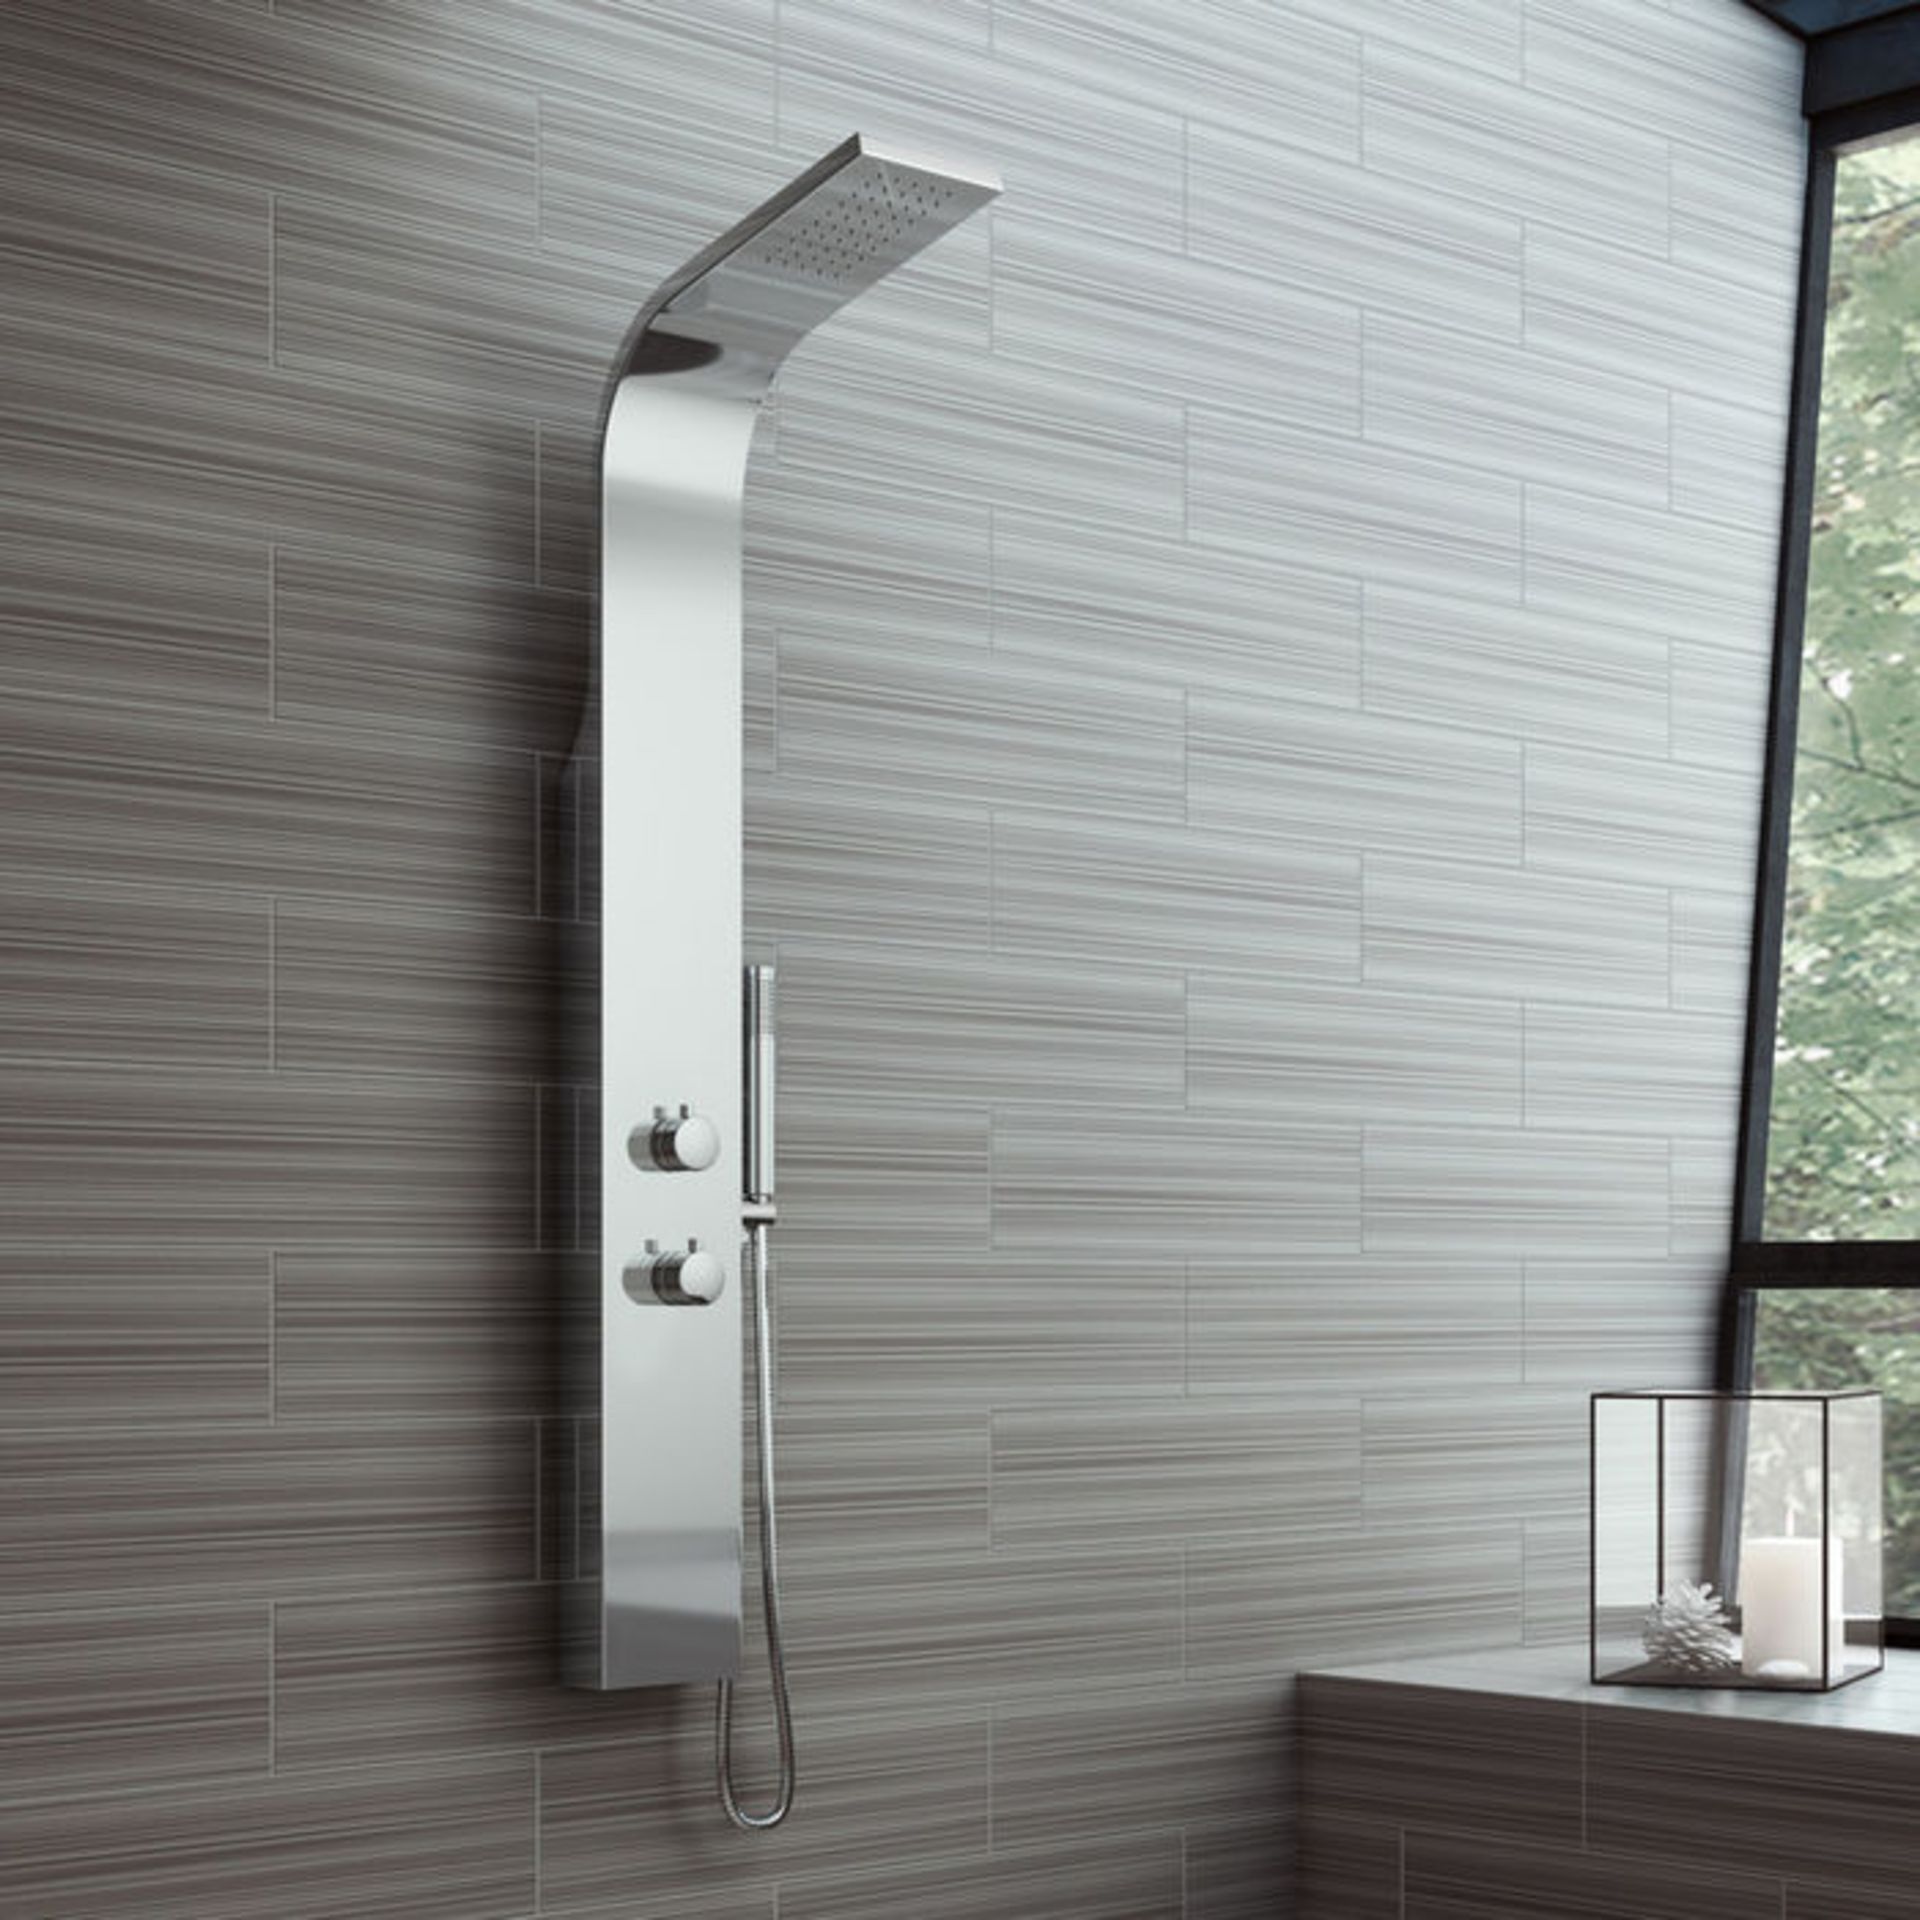 (O27) Exposed Panel Polished Chrome Shower Tower & Handheld. Feel inspired with this contemporary